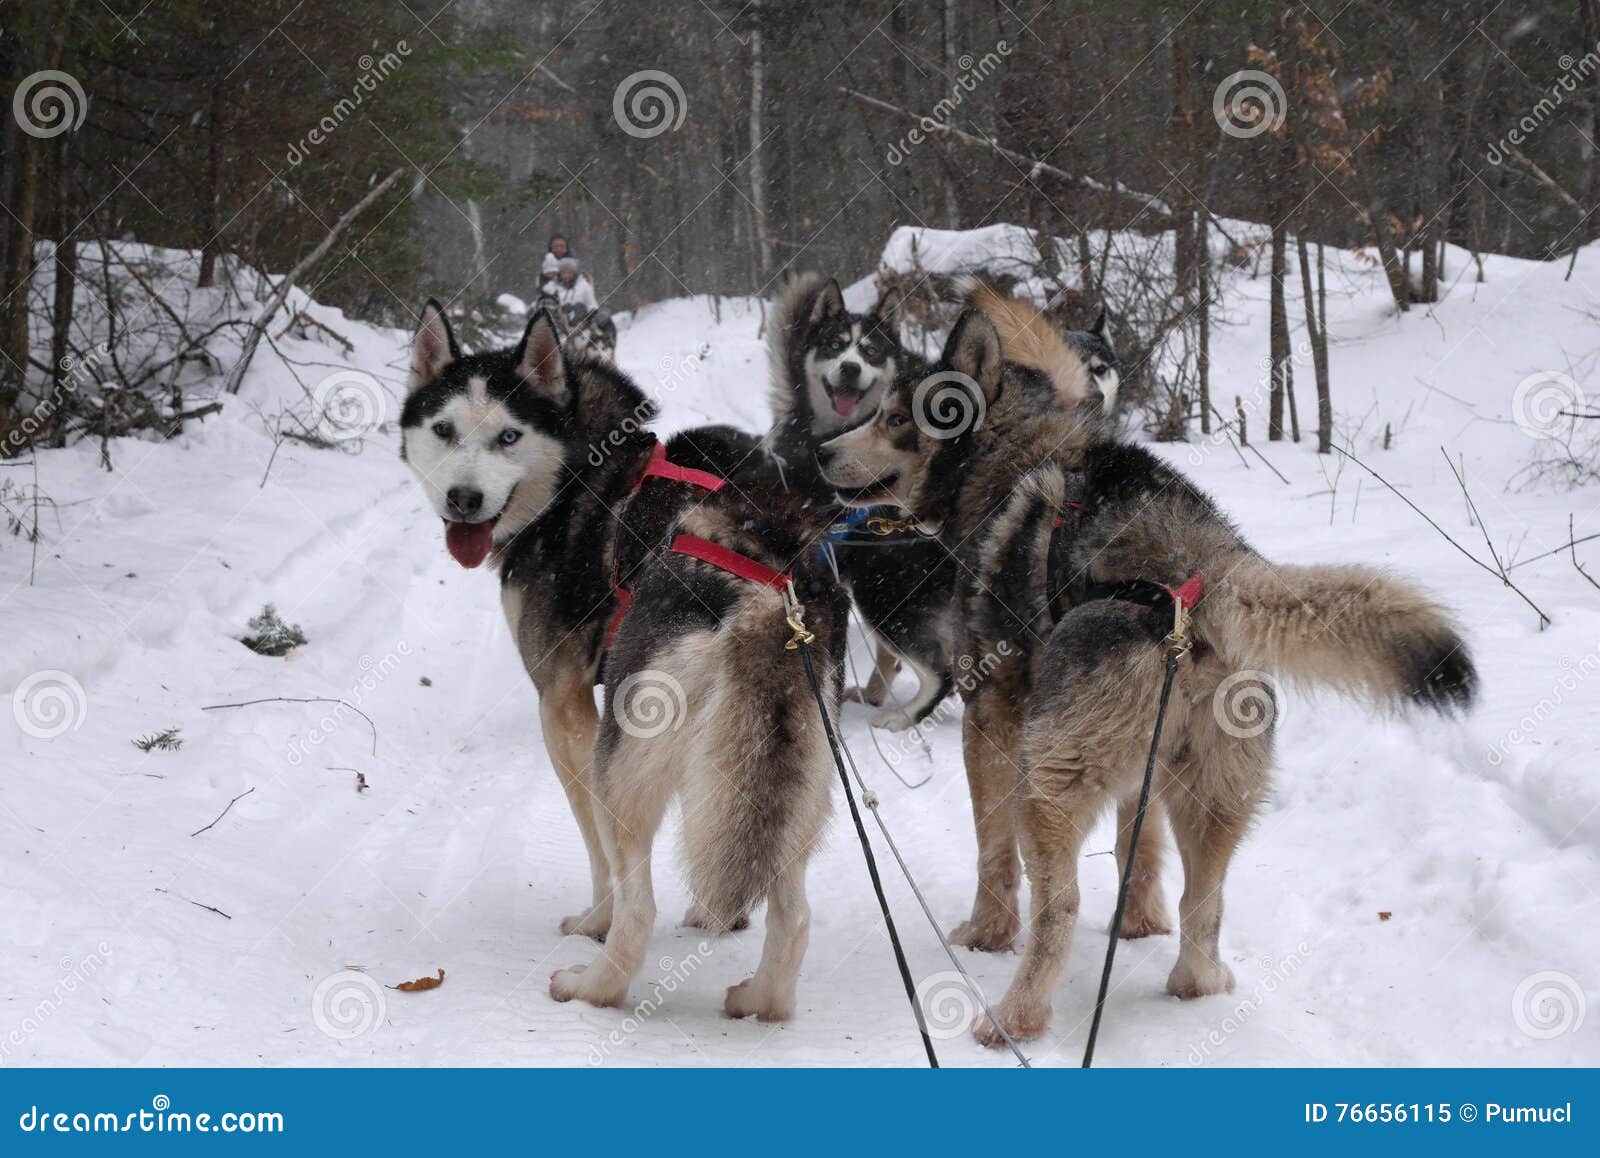 Woman Musher Hiding Behind Sleigh At Sled Dog Race On Snow In Winter Stock  Photo, Picture and Royalty Free Image. Image 80124773.